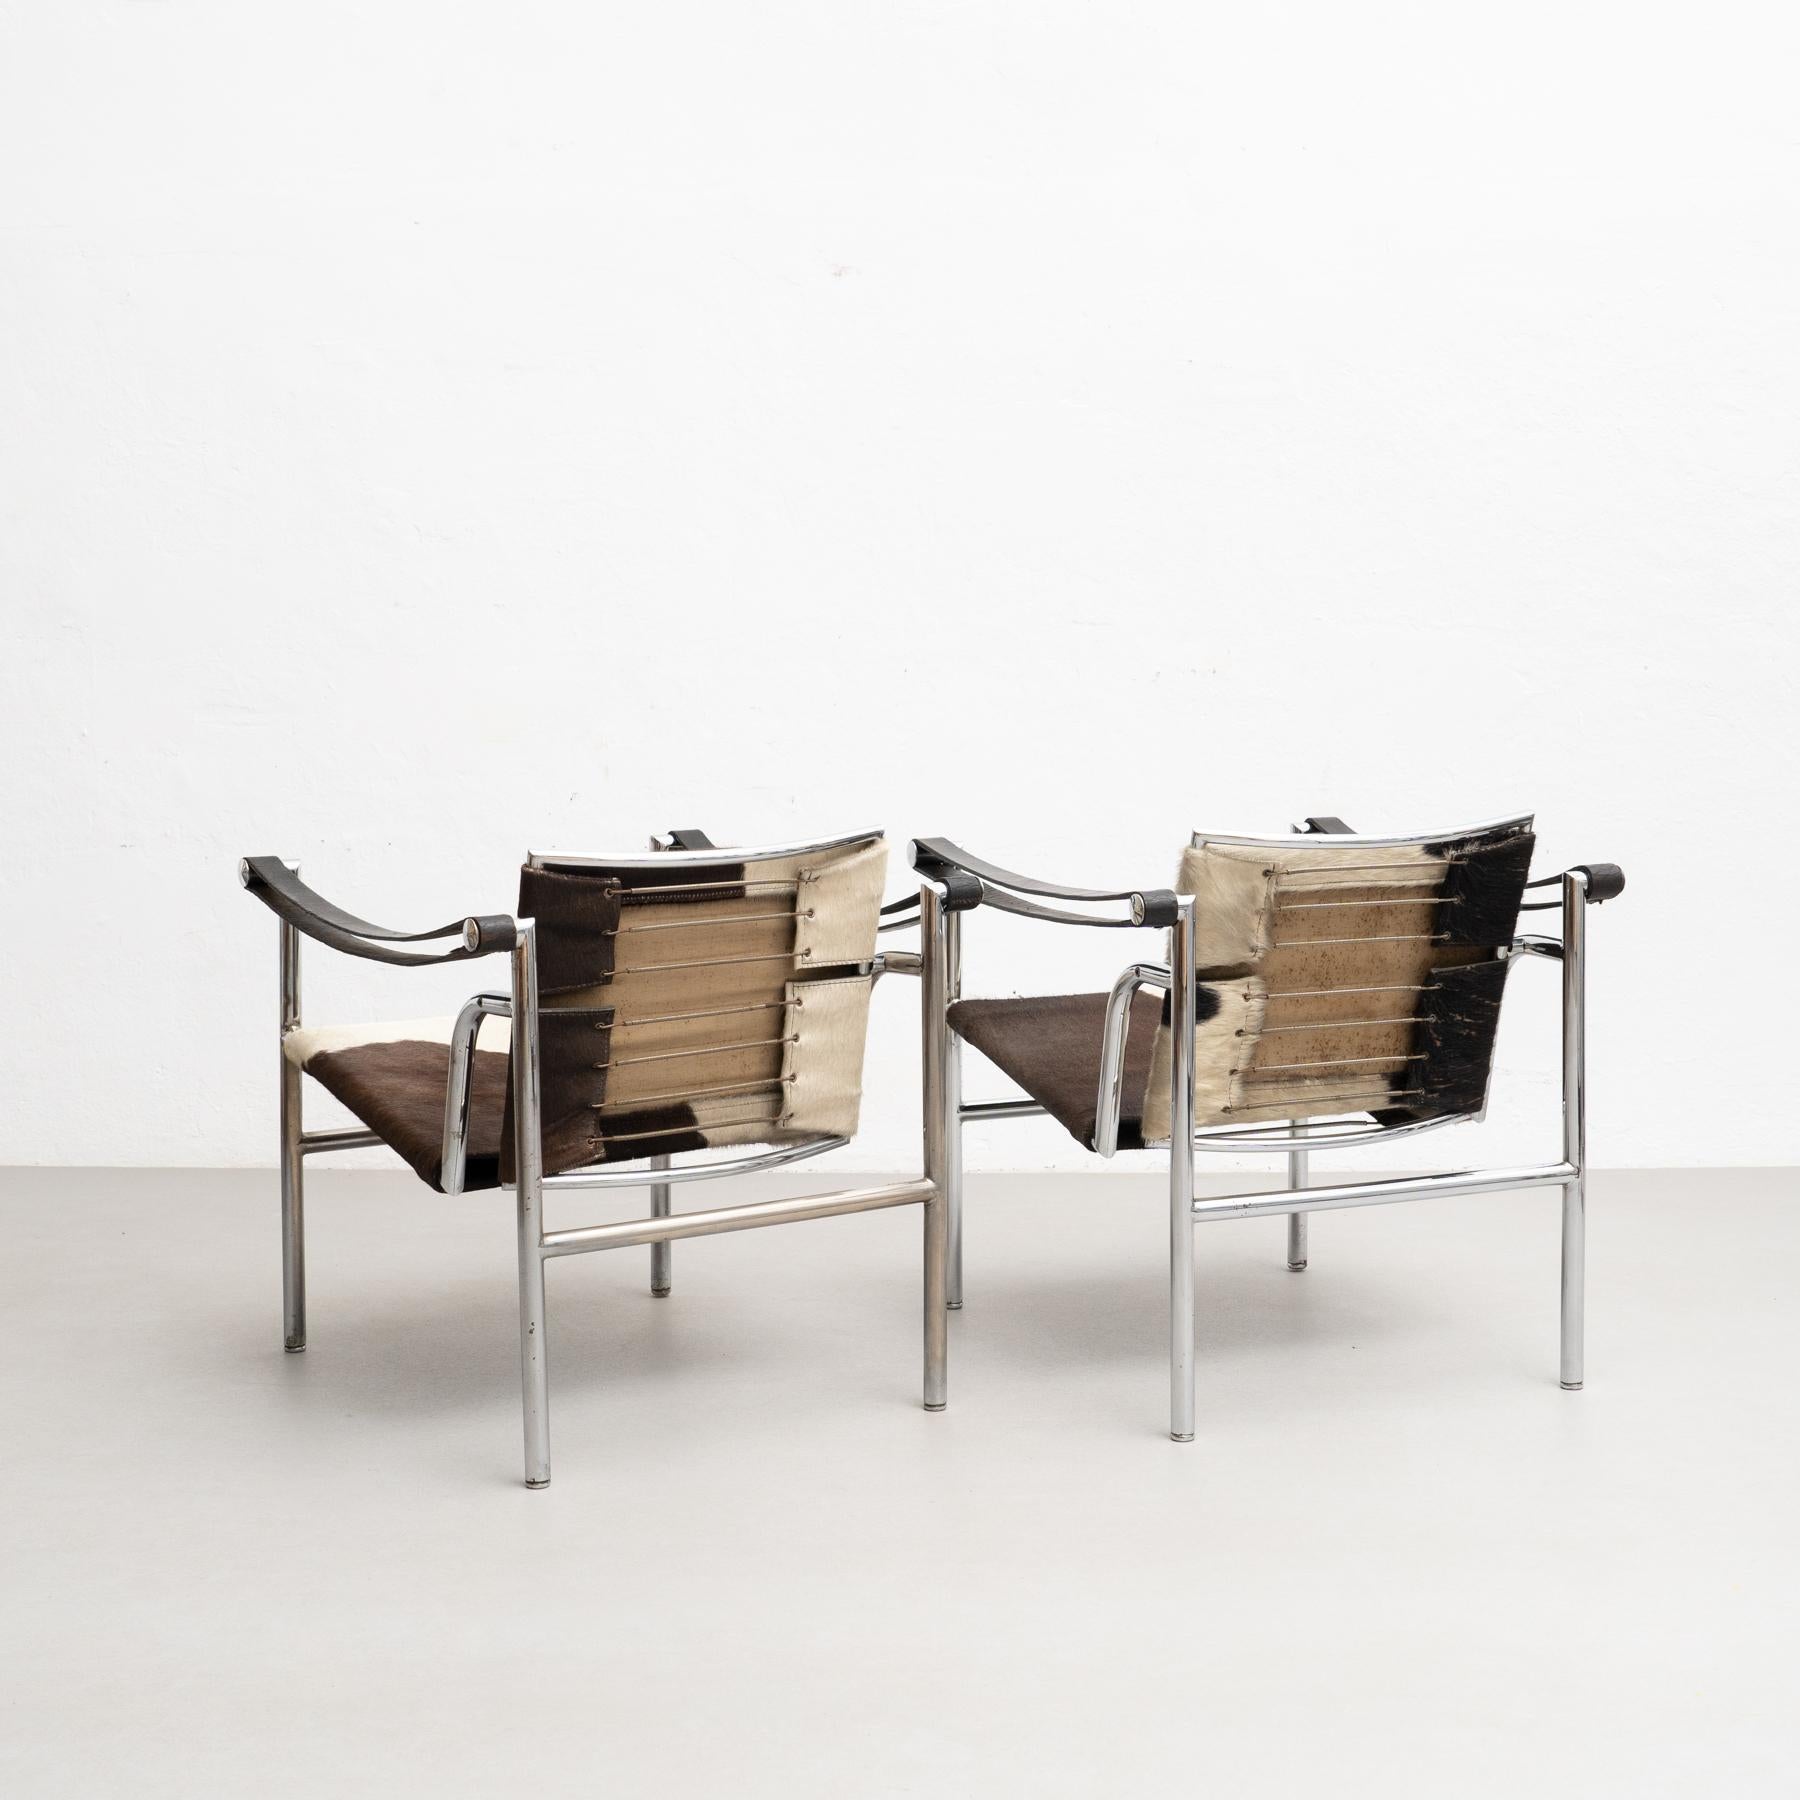 Steel Early Ed. Set of Two Lc1 Chairs by Le Corbusier, Charlotte Perriand by Cassina